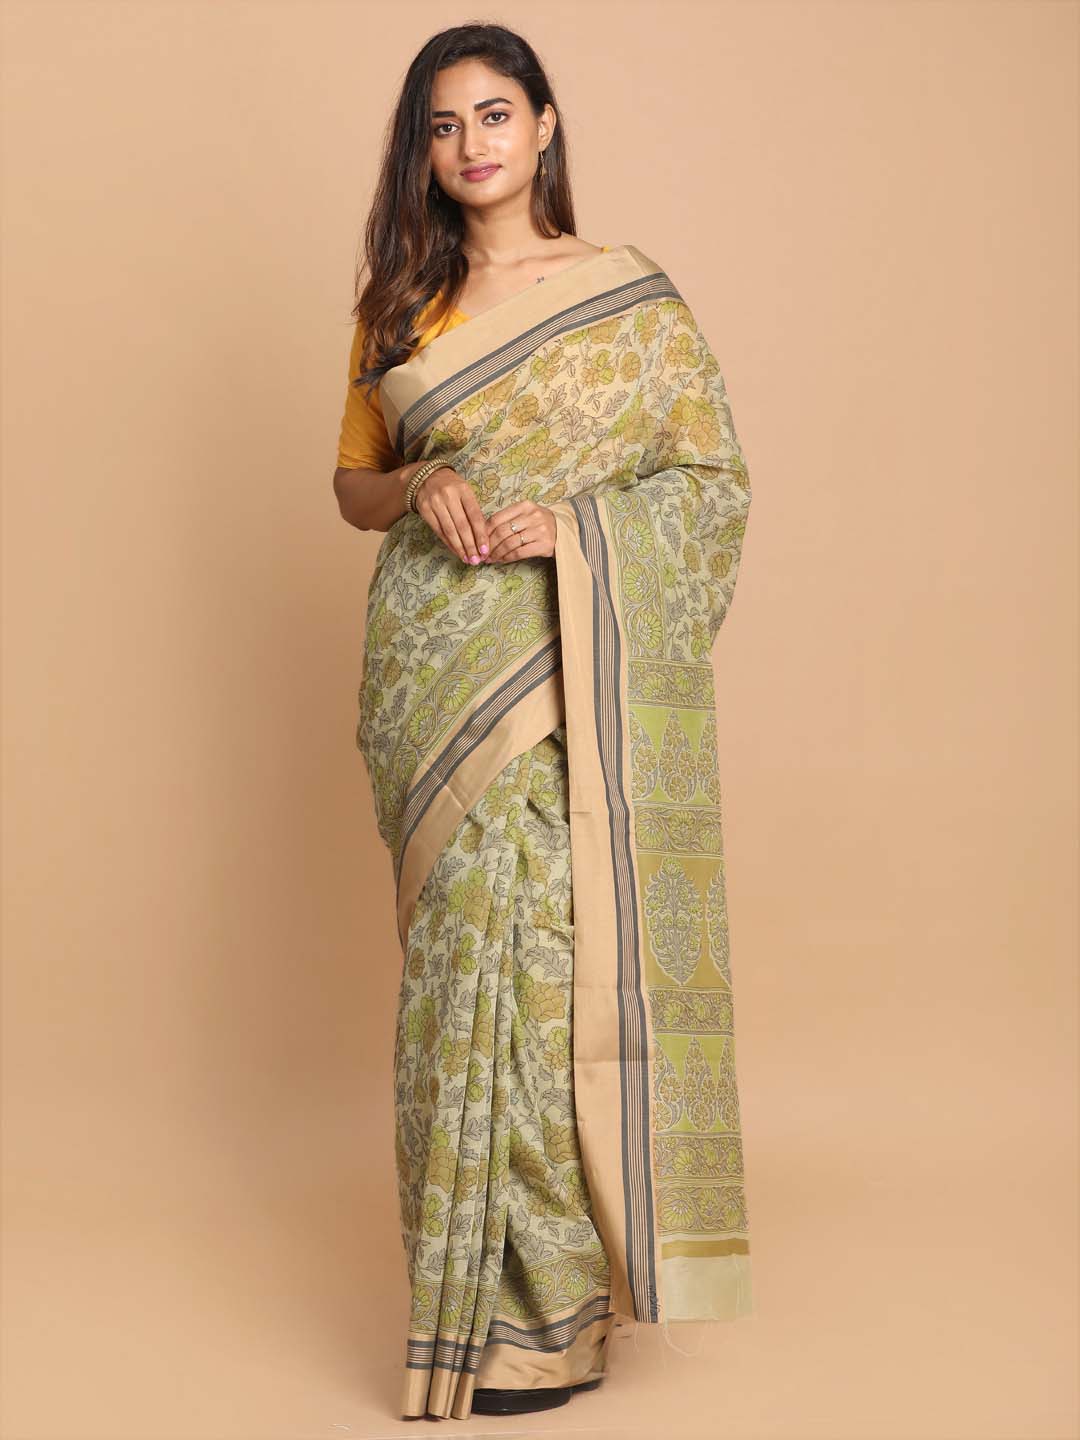 Indethnic Printed Cotton Blend Saree in Olive - View 1